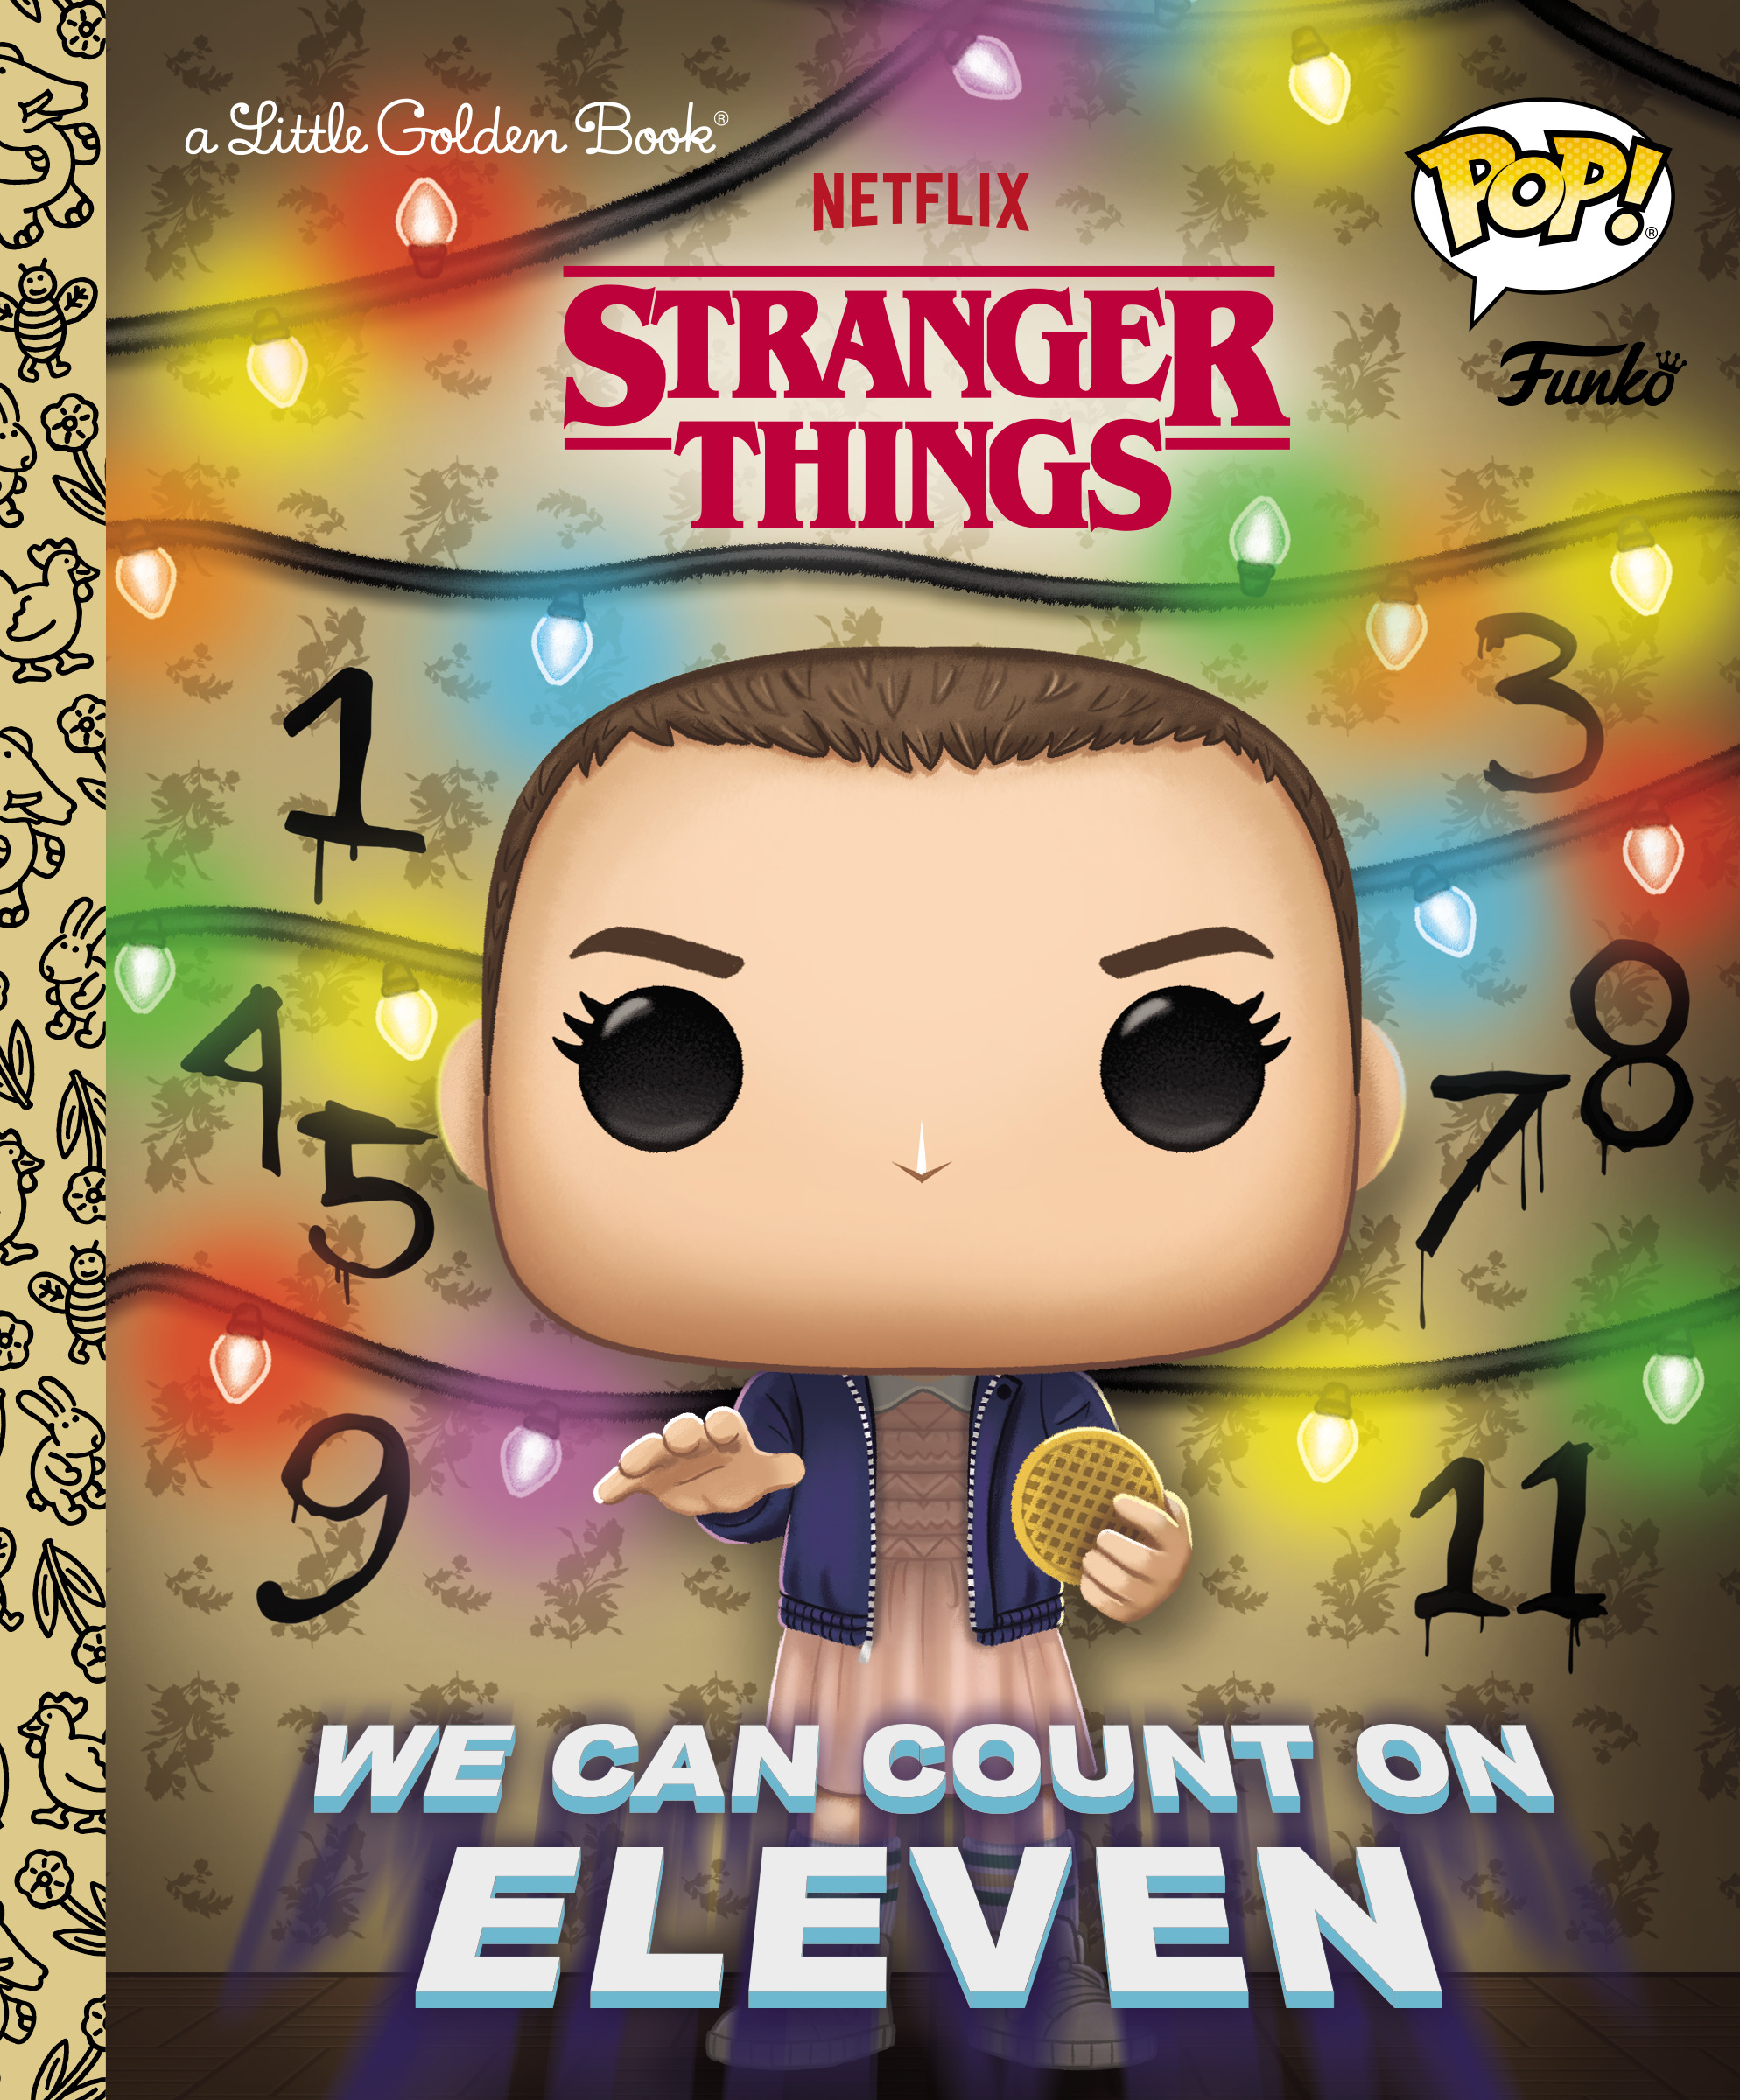 Stranger Things: We Can Count on Eleven (Funko Pop!) | First reader